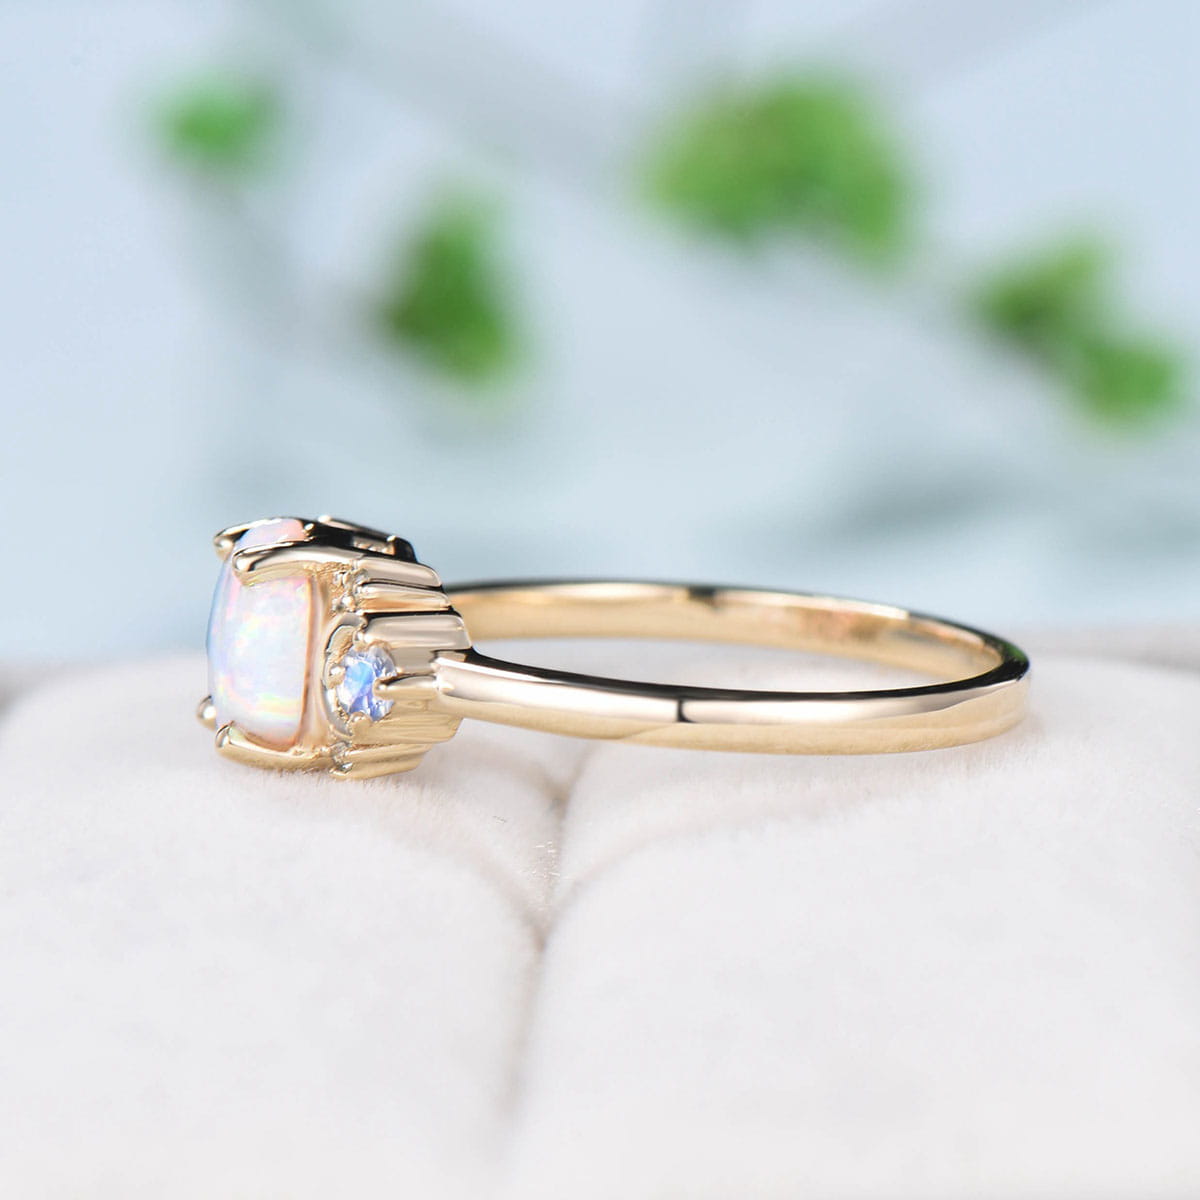 Vintage Moon Opal Engagement Ring Yellow Gold Unique Hexagon Fire Opal Promise Ring For Women Art Deco Cluster Monnstone Wedding Ring Gift - PENFINE